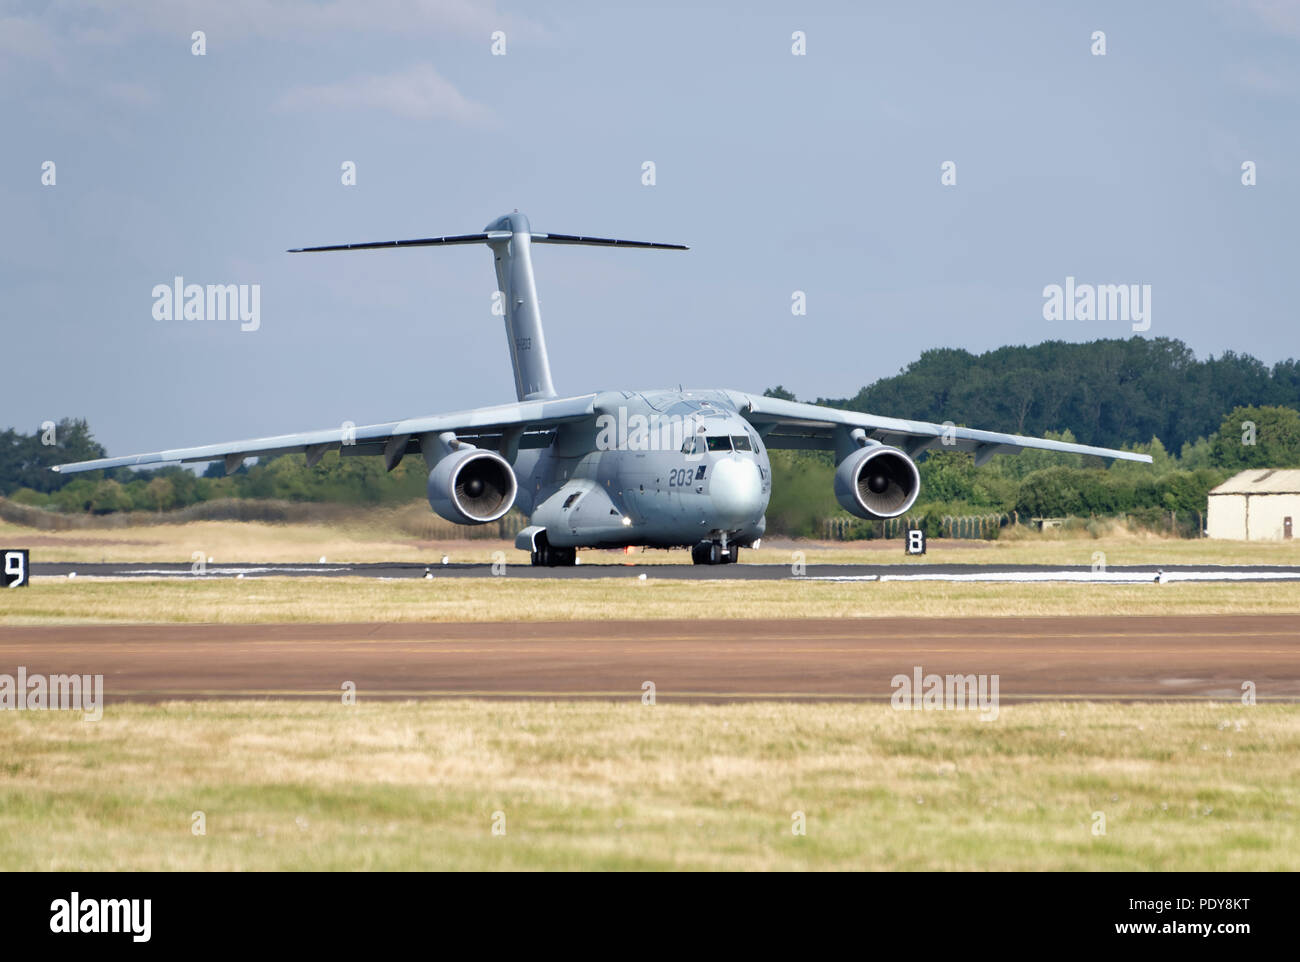 The Kawasaki C-2 a new Military Transport aircraft designed and manufactured in Japan makes its first flight to the United Kingdom to attend the RIAT Stock Photo